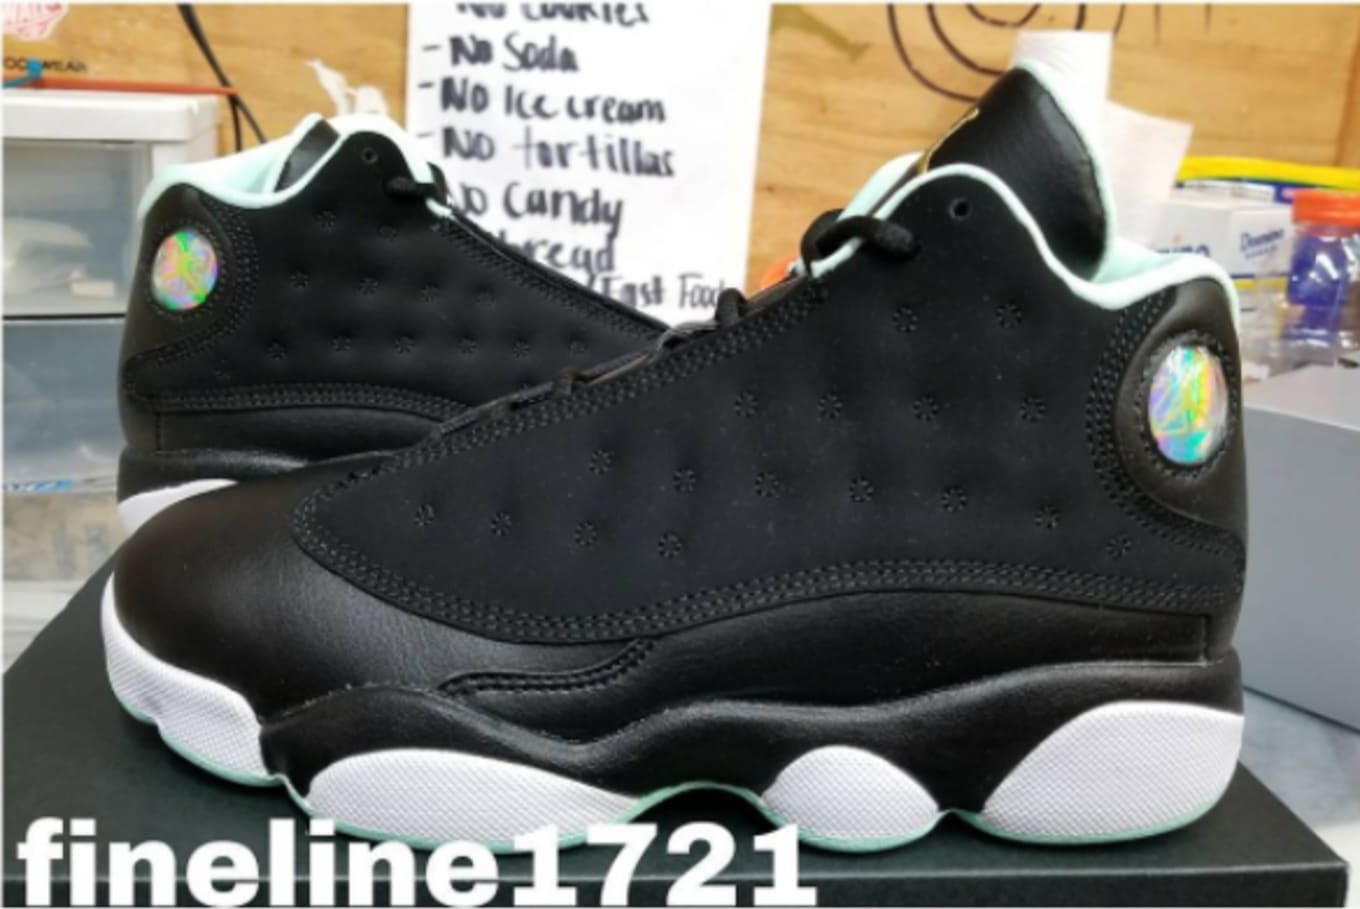 black and mint 13s